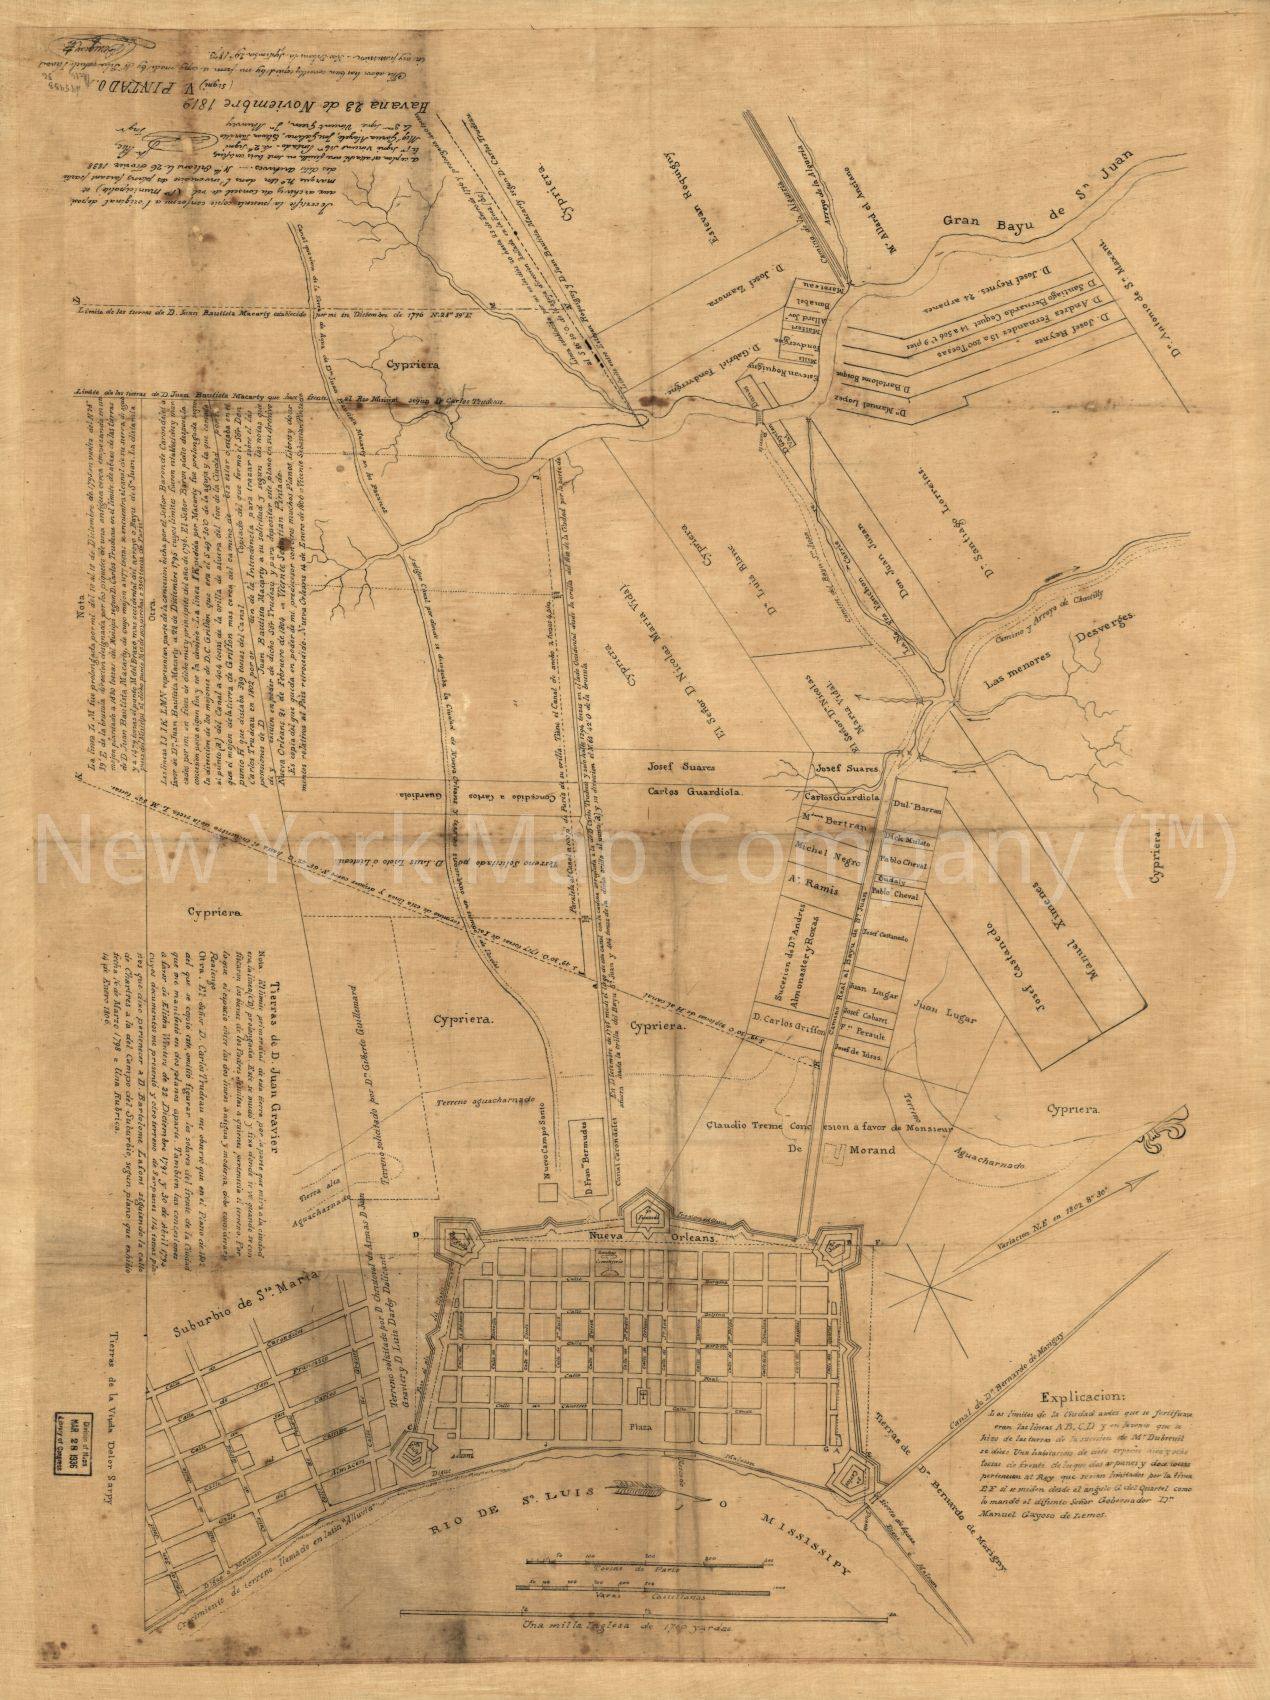 1819 map Map of New Orleans and vicinity This map is an 1873 copy of the original 1804 map copied by Pintado (in Havana in 1819) and verified by Pilié, the New Orlweans Surveyor in 1838. Map reflects information compiled by Pintado in 1795-96 and set dow - New York Map Company